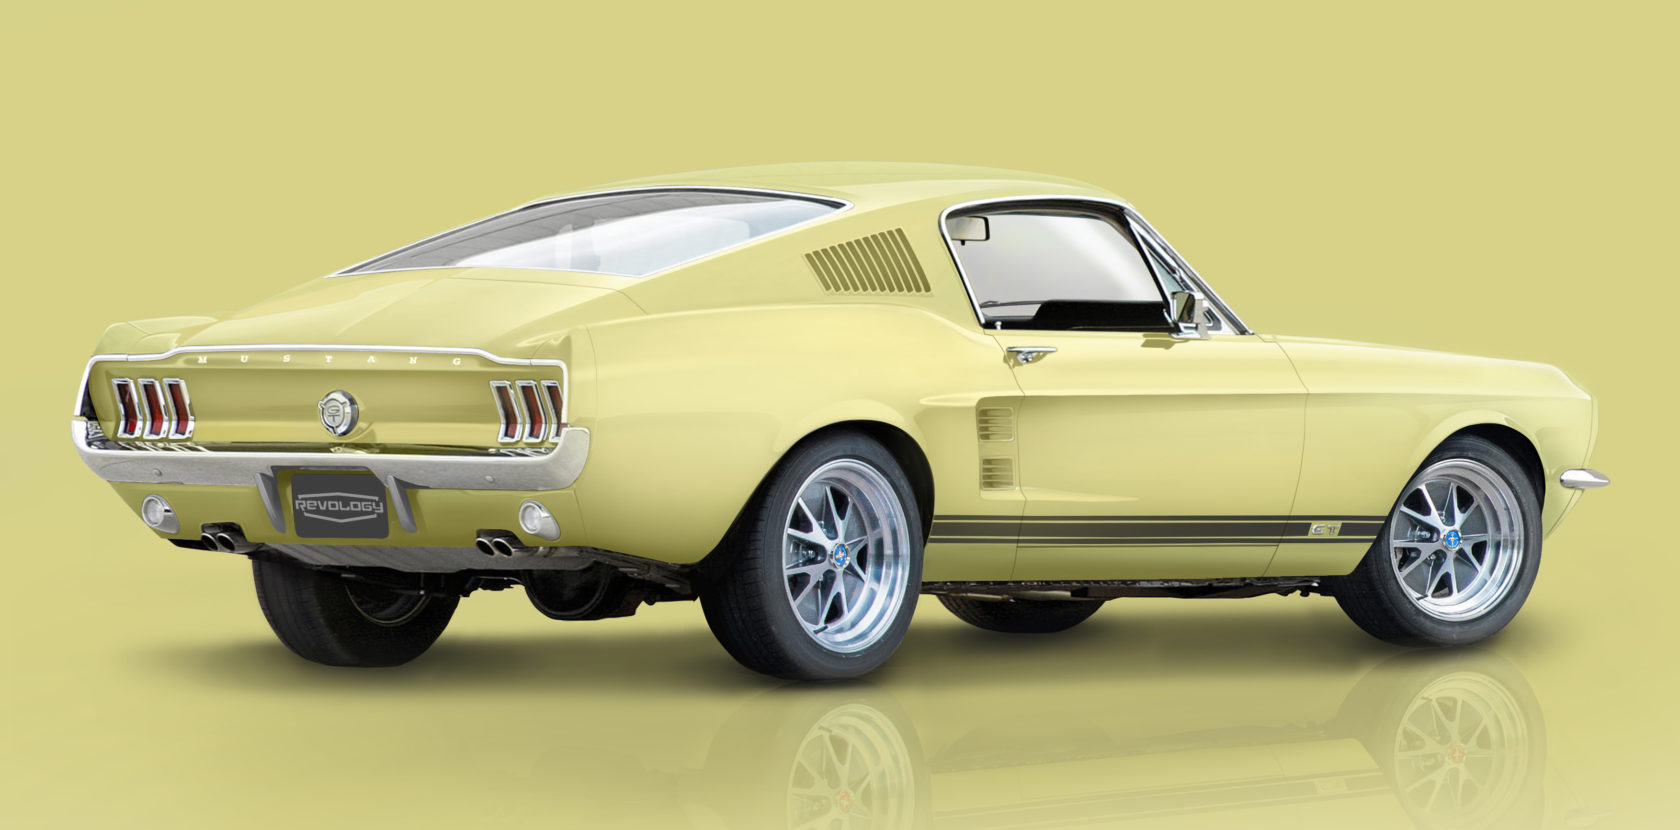 Detail Images Of Mustangs Cars Nomer 31